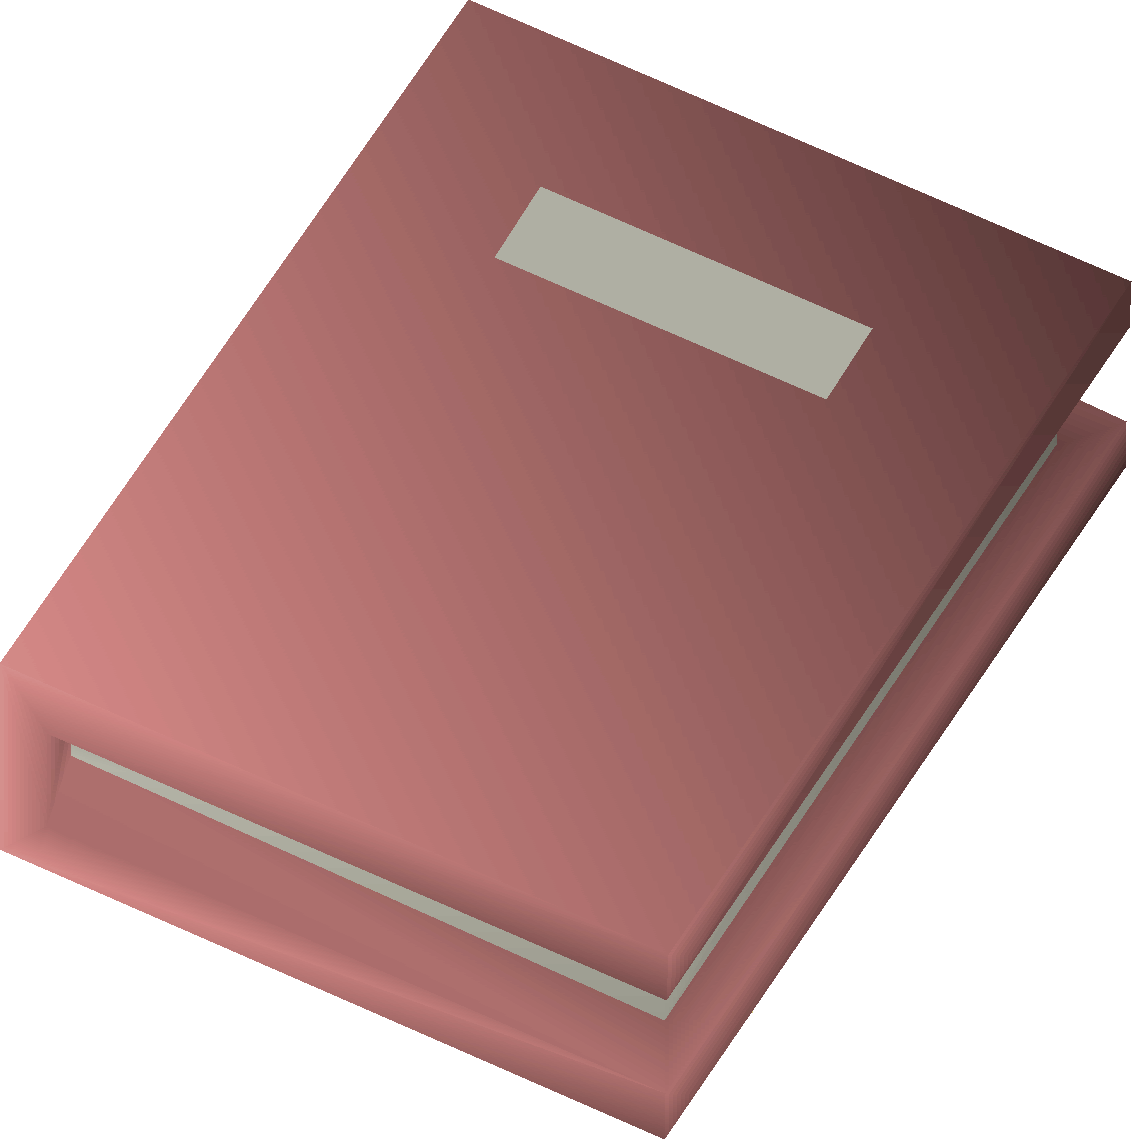 Diary PNG Picture